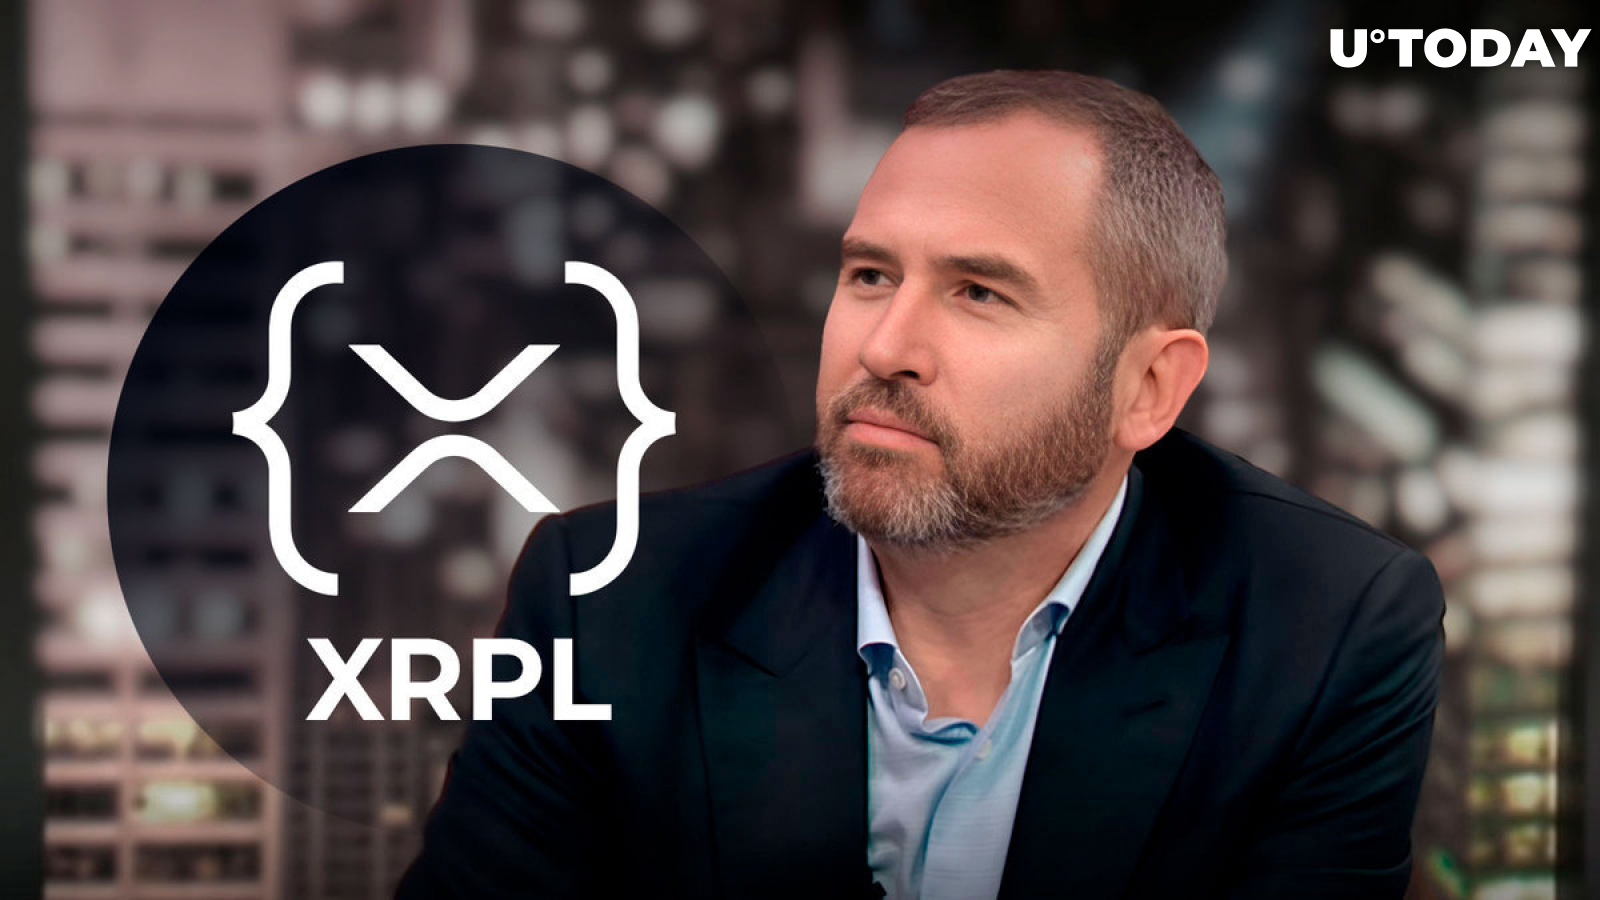 Ripple CEO to Share XRP Ledger Insights at Blockbuster Event: Details